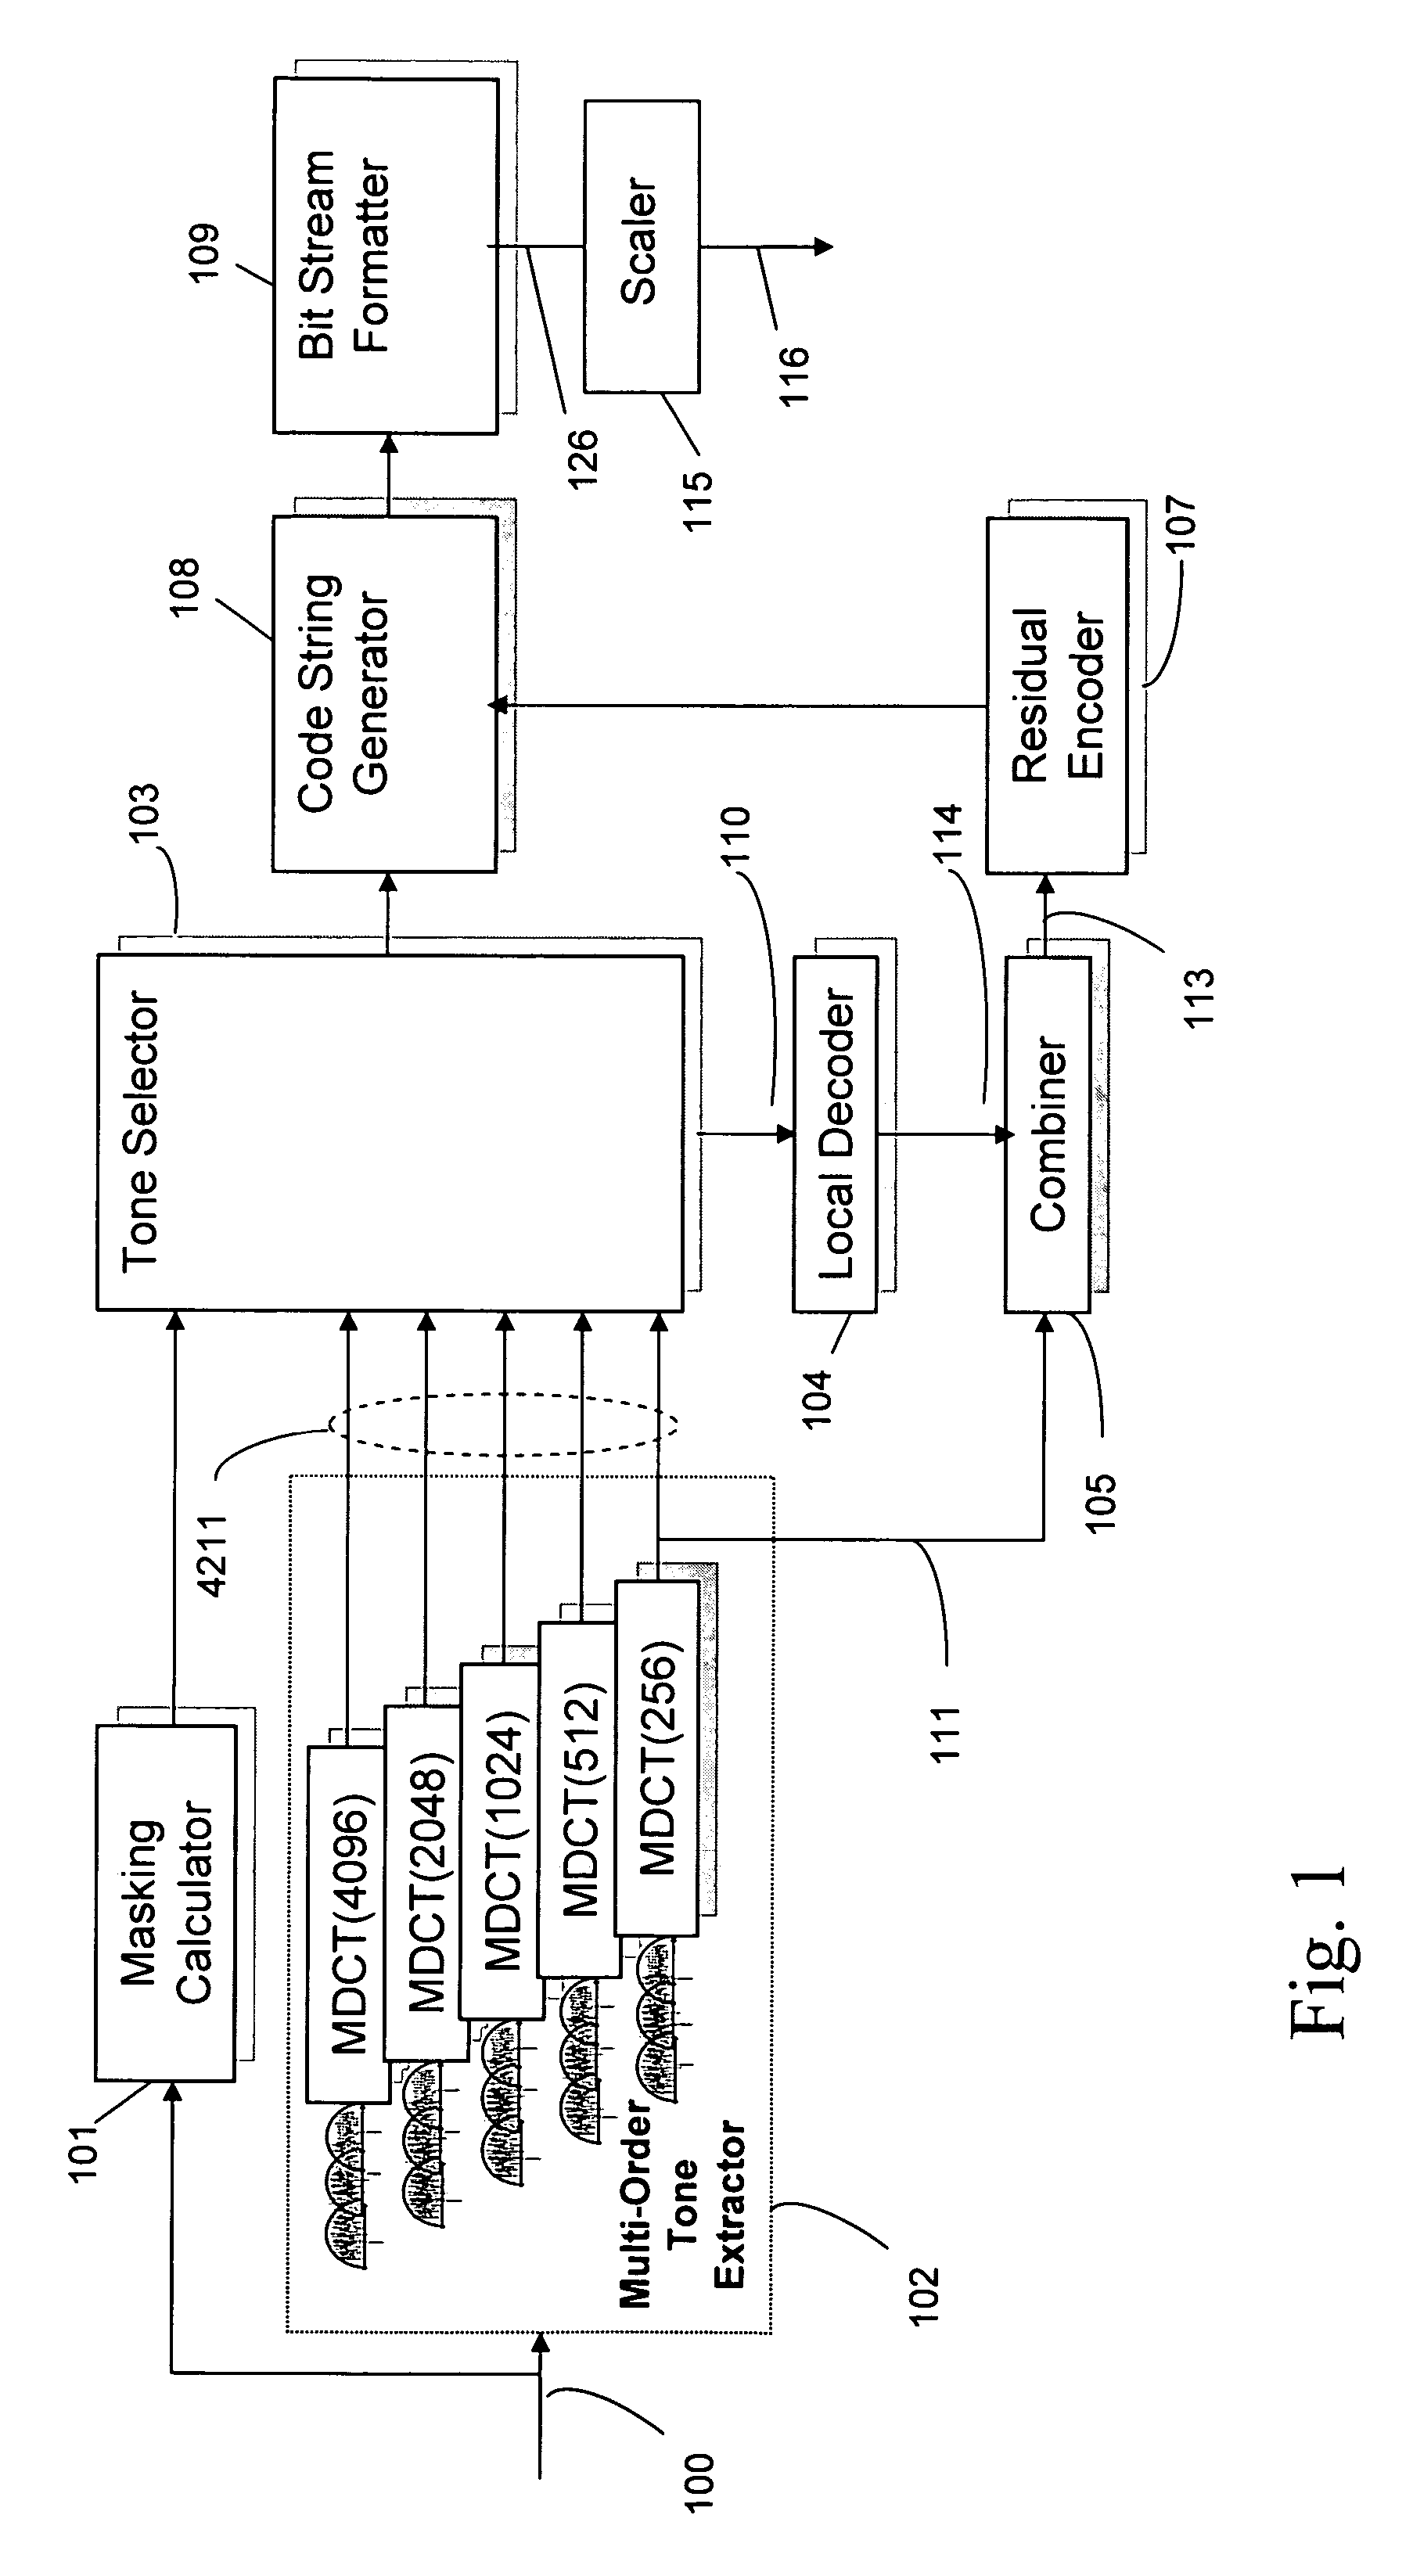 Scalable compressed audio bit stream and codec using a hierarchical filterbank and multichannel joint coding